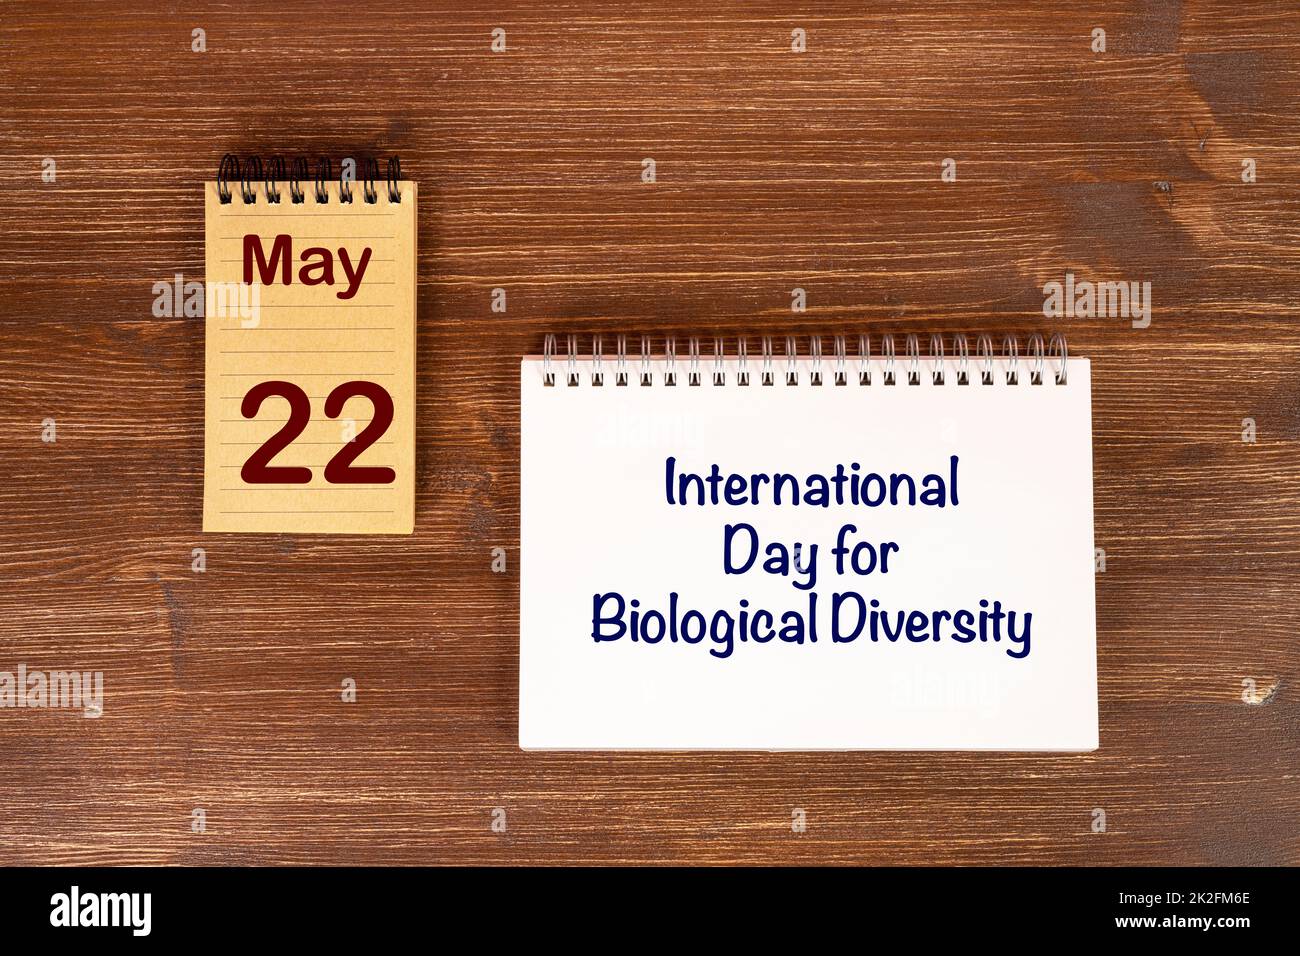 International Day for Biological Diversity Stock Photo